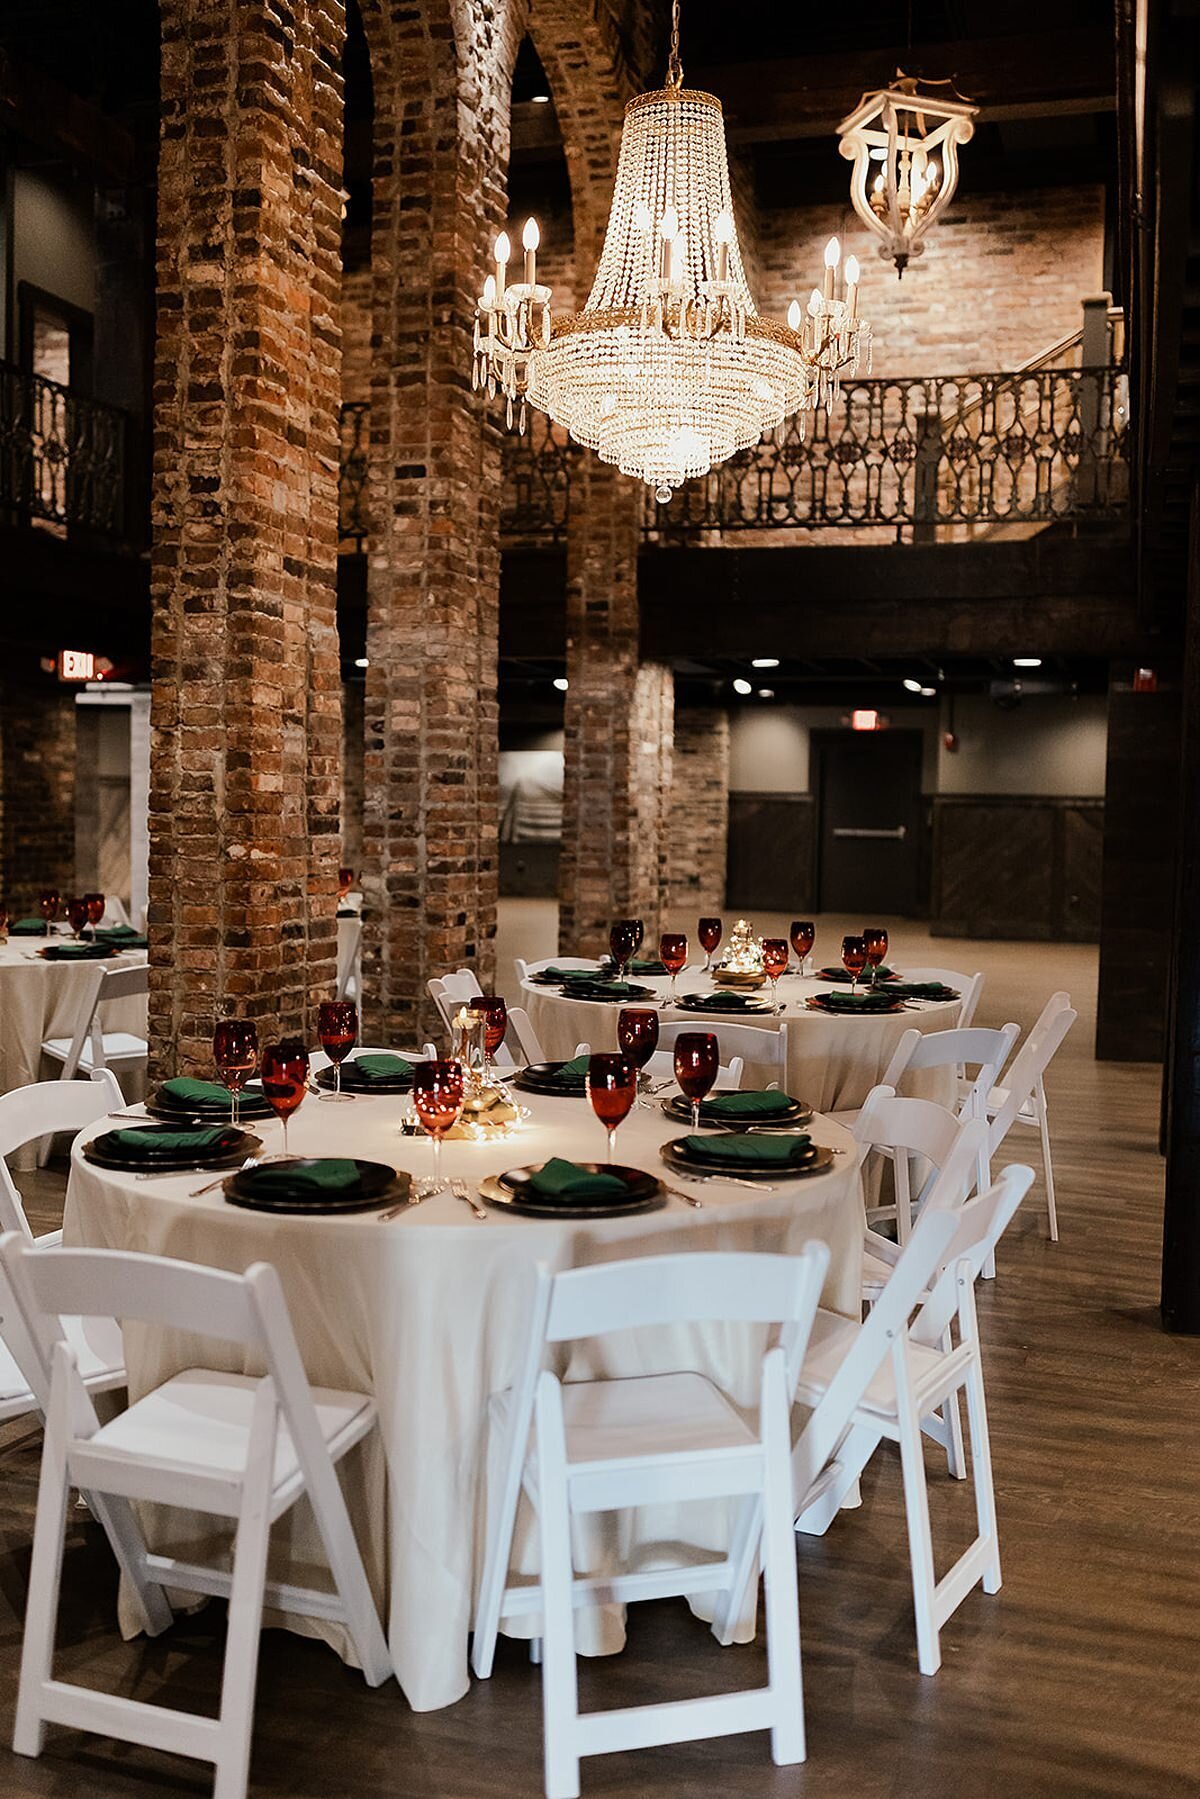 White garden chairs surround tables with white linens. The tables are set with a black charger topped with an emerald green napkin. On either side of the plate is gold flatware and a red water goblet. The venue has dark hardwood floors, exposed brick arches and and assortment of crystal chandeliers.